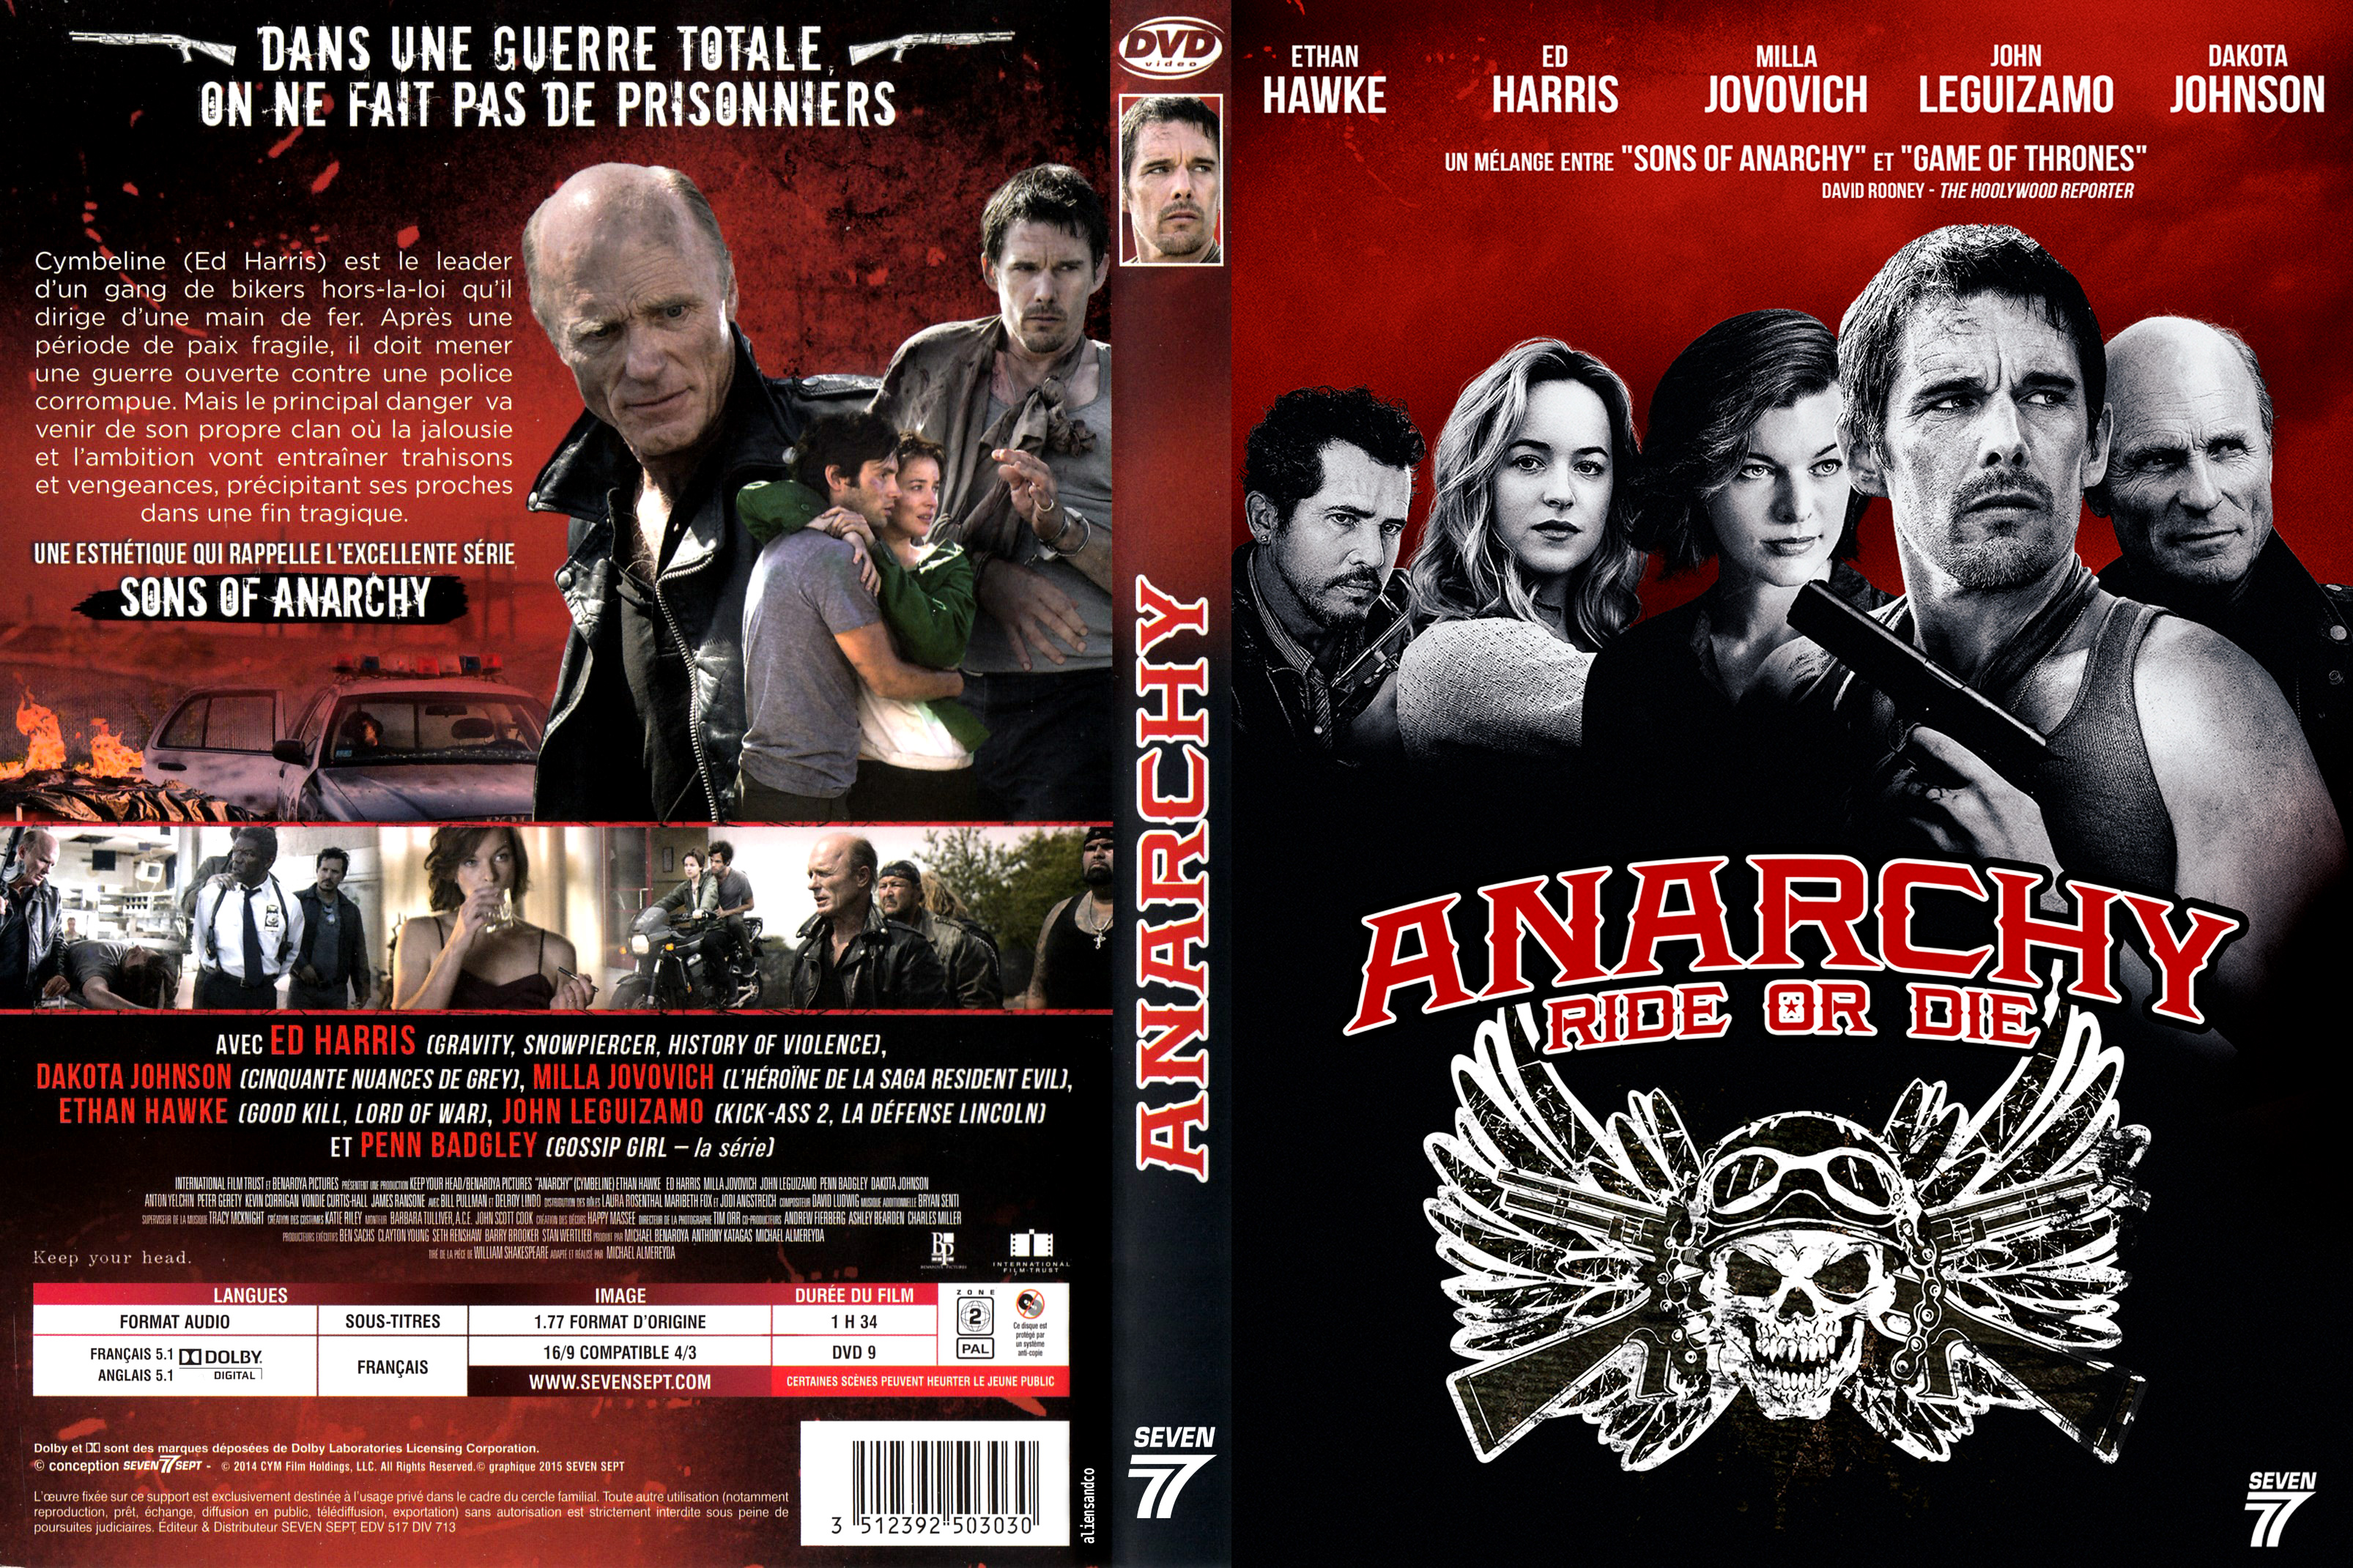 Jaquette DVD Anarchy